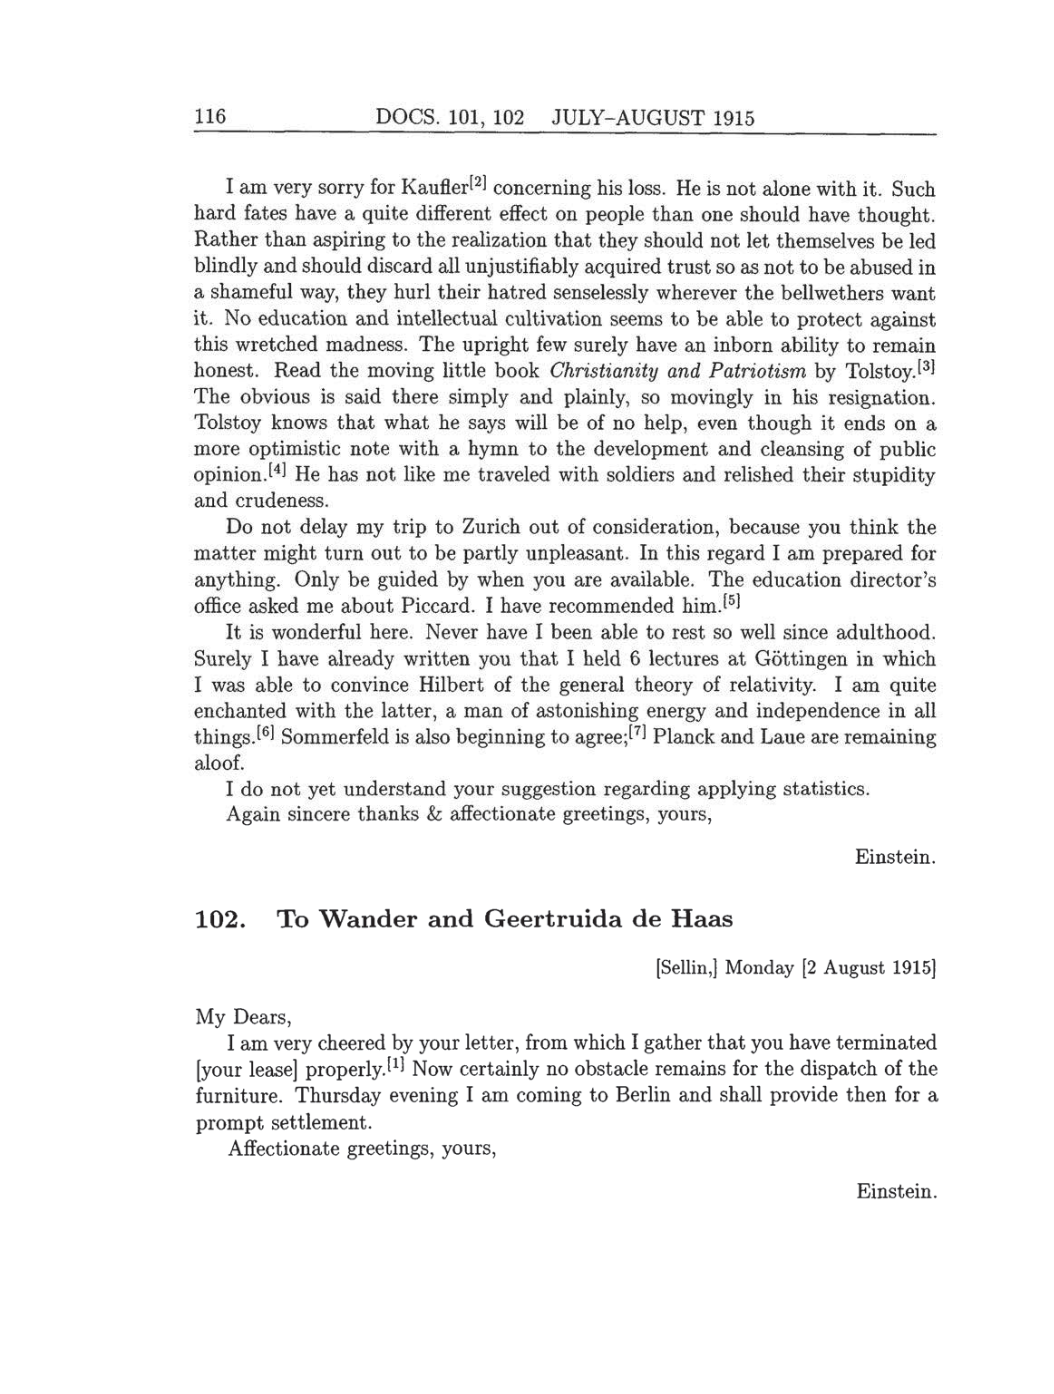 Volume 8: The Berlin Years: Correspondence, 1914-1918 (English translation supplement) page 116